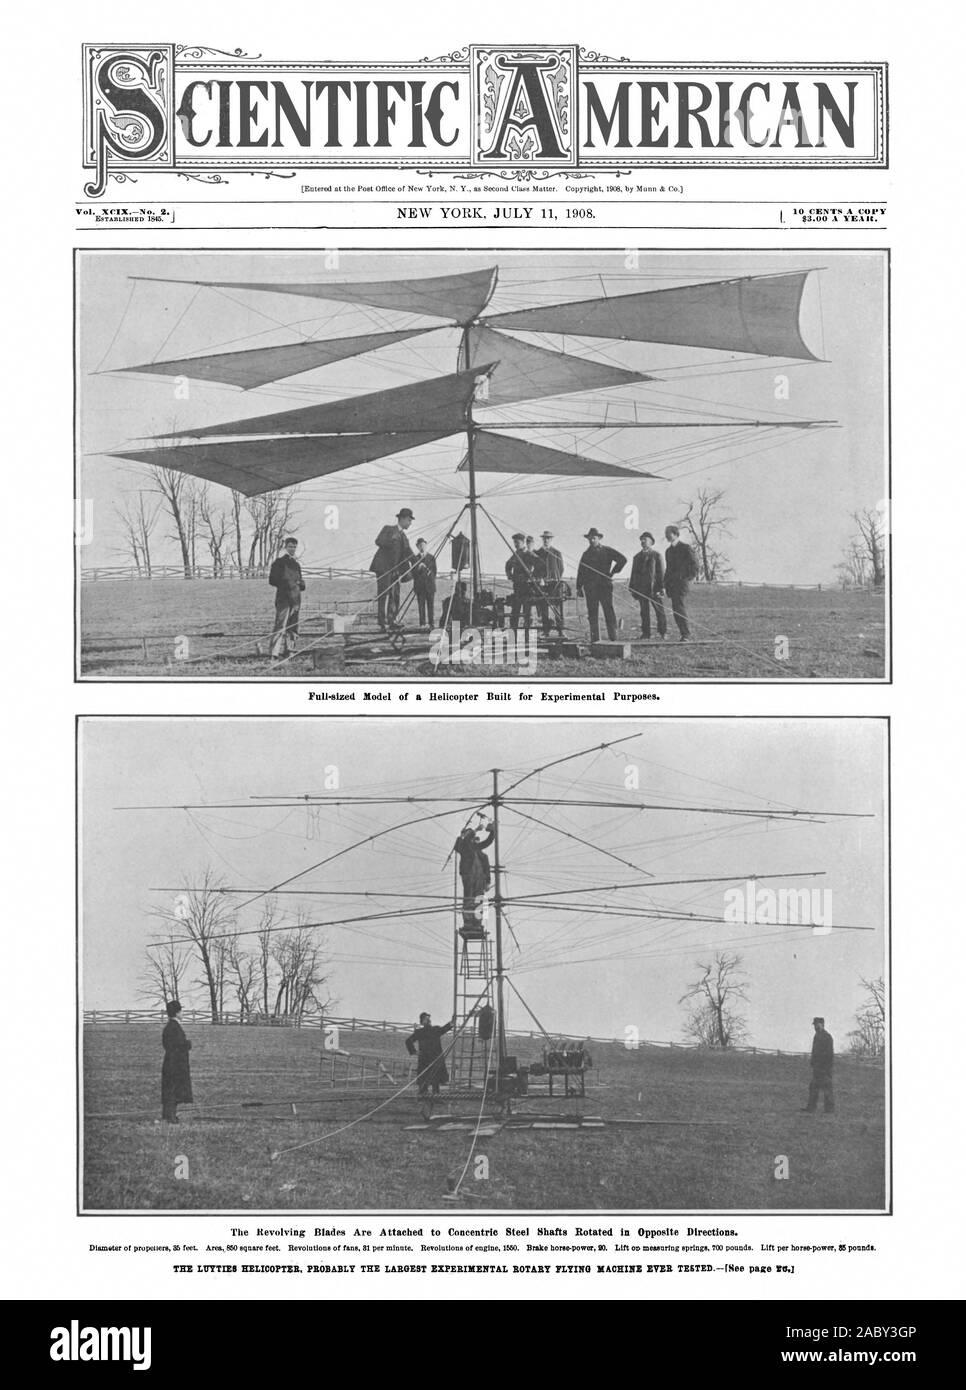 The Revolving Blades Are Attached to Concentric Steel Shafts Rotated in  Opposite Directions. THE L1JYTIES HELICOPTER. PROBABLY THE LARGEST  EXPERIMENTAL ROTARY PLYING MACHINE EVER TESTEDNee page VO.1 CIENTIFIC  MERICAN, scientific american, 1908-07-11